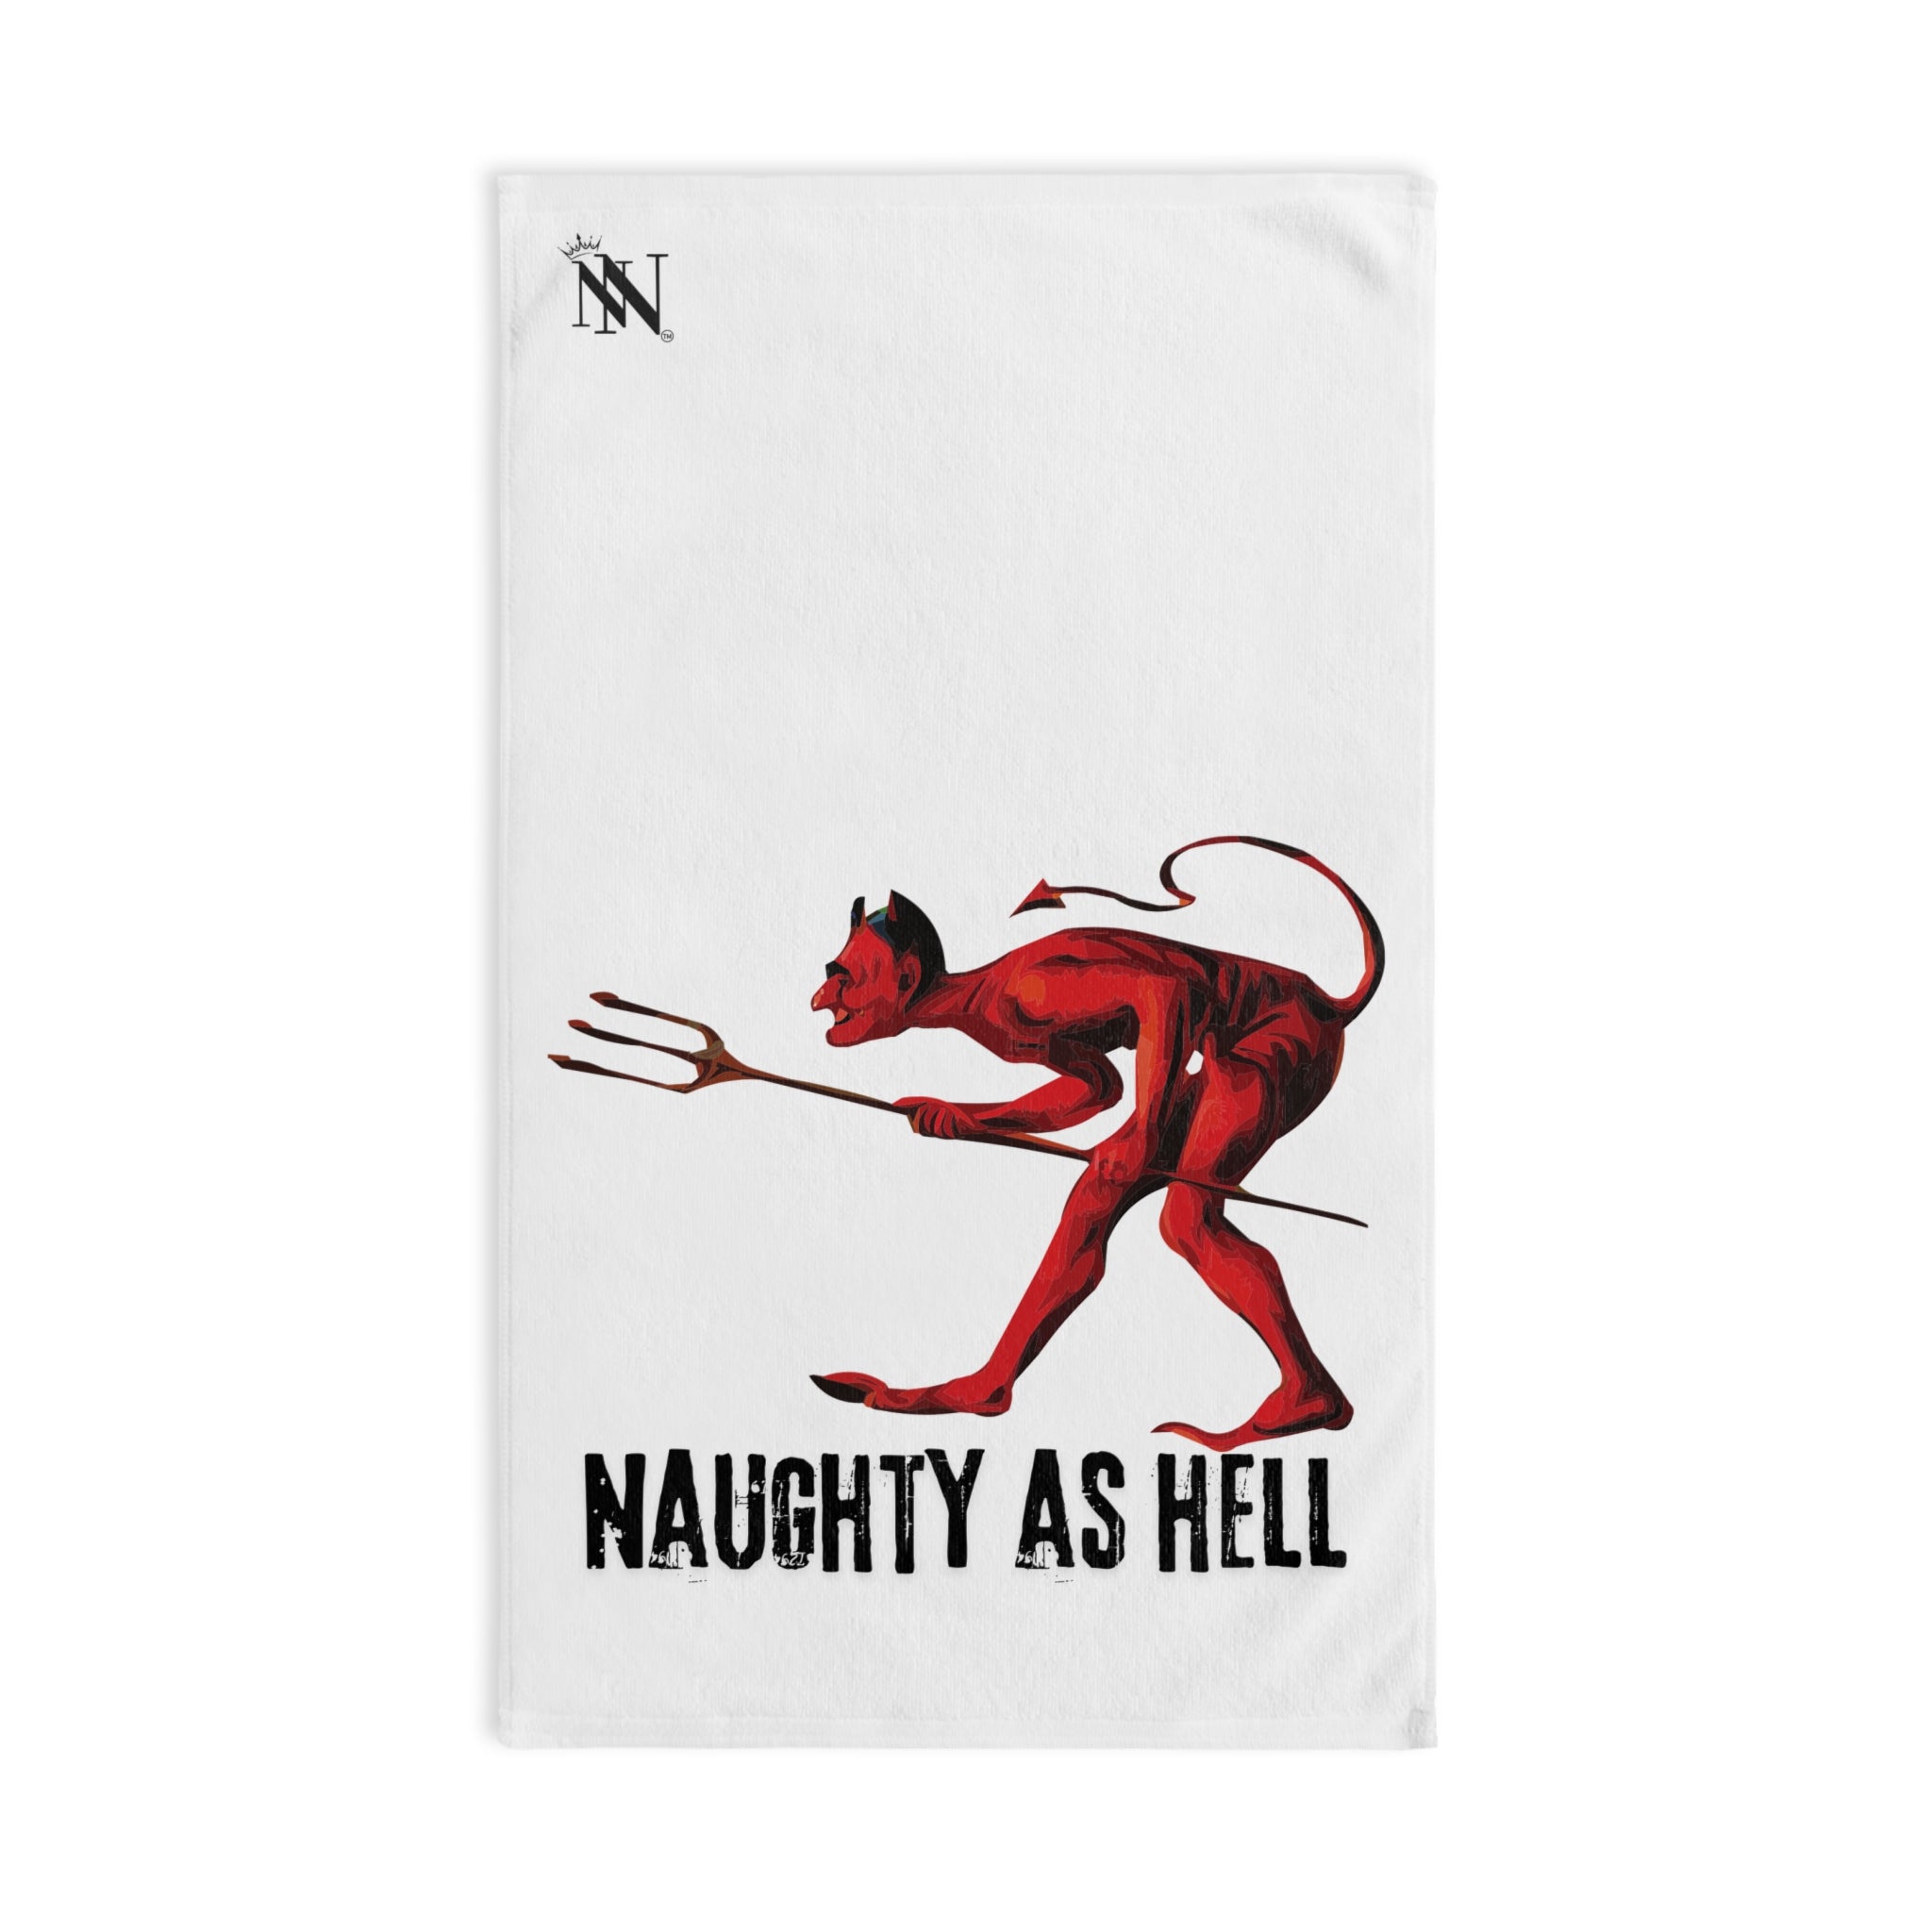 Naughty as hell sexual deviant towel